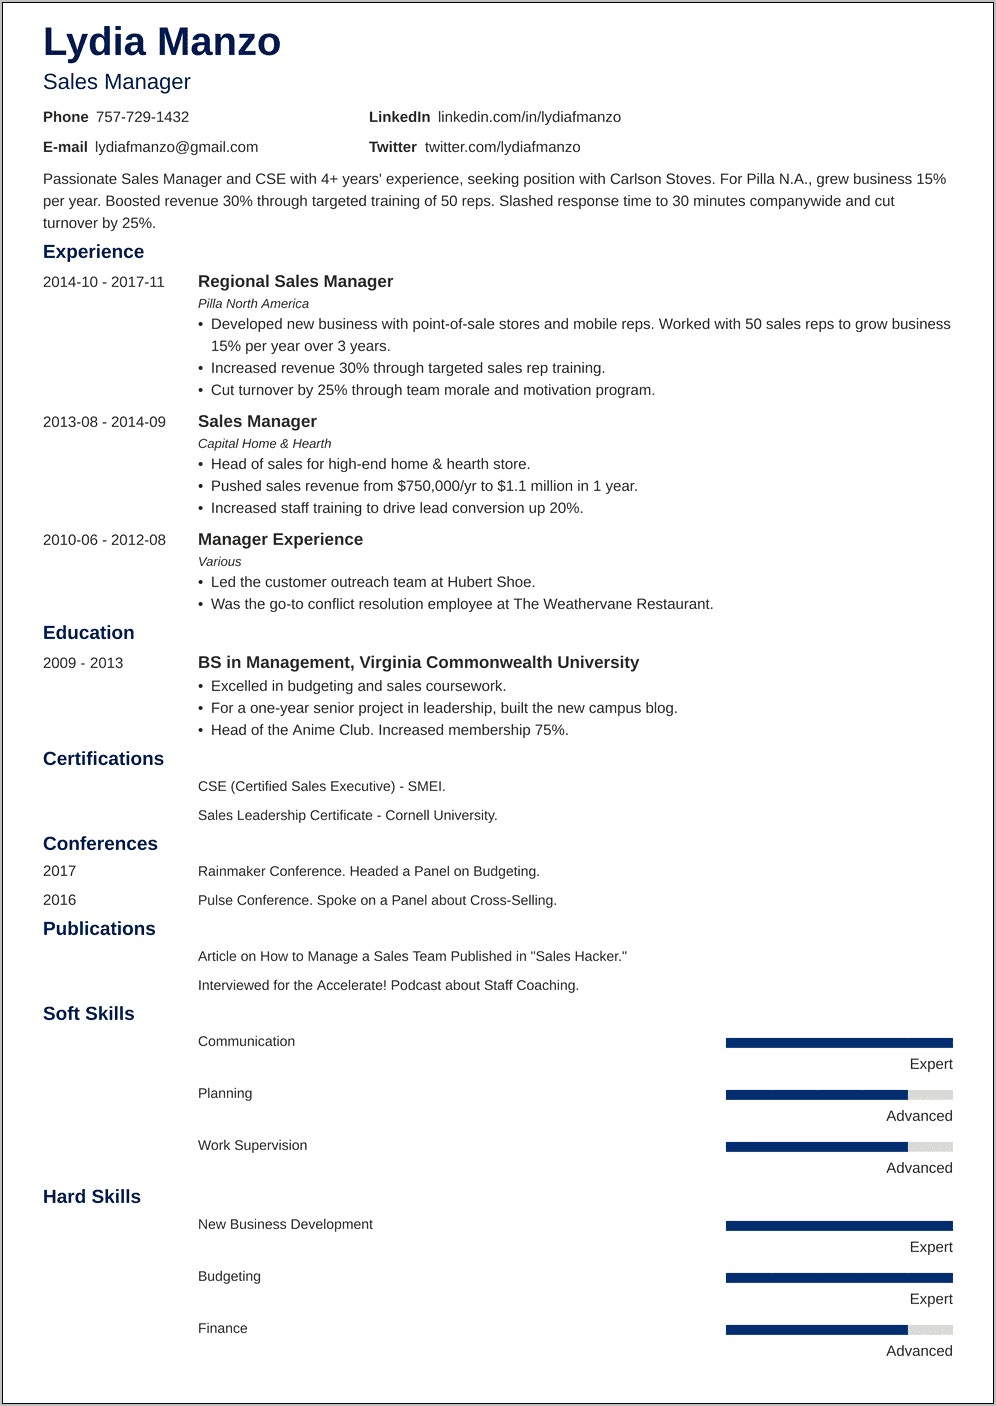 Resume Summary For Manager Position